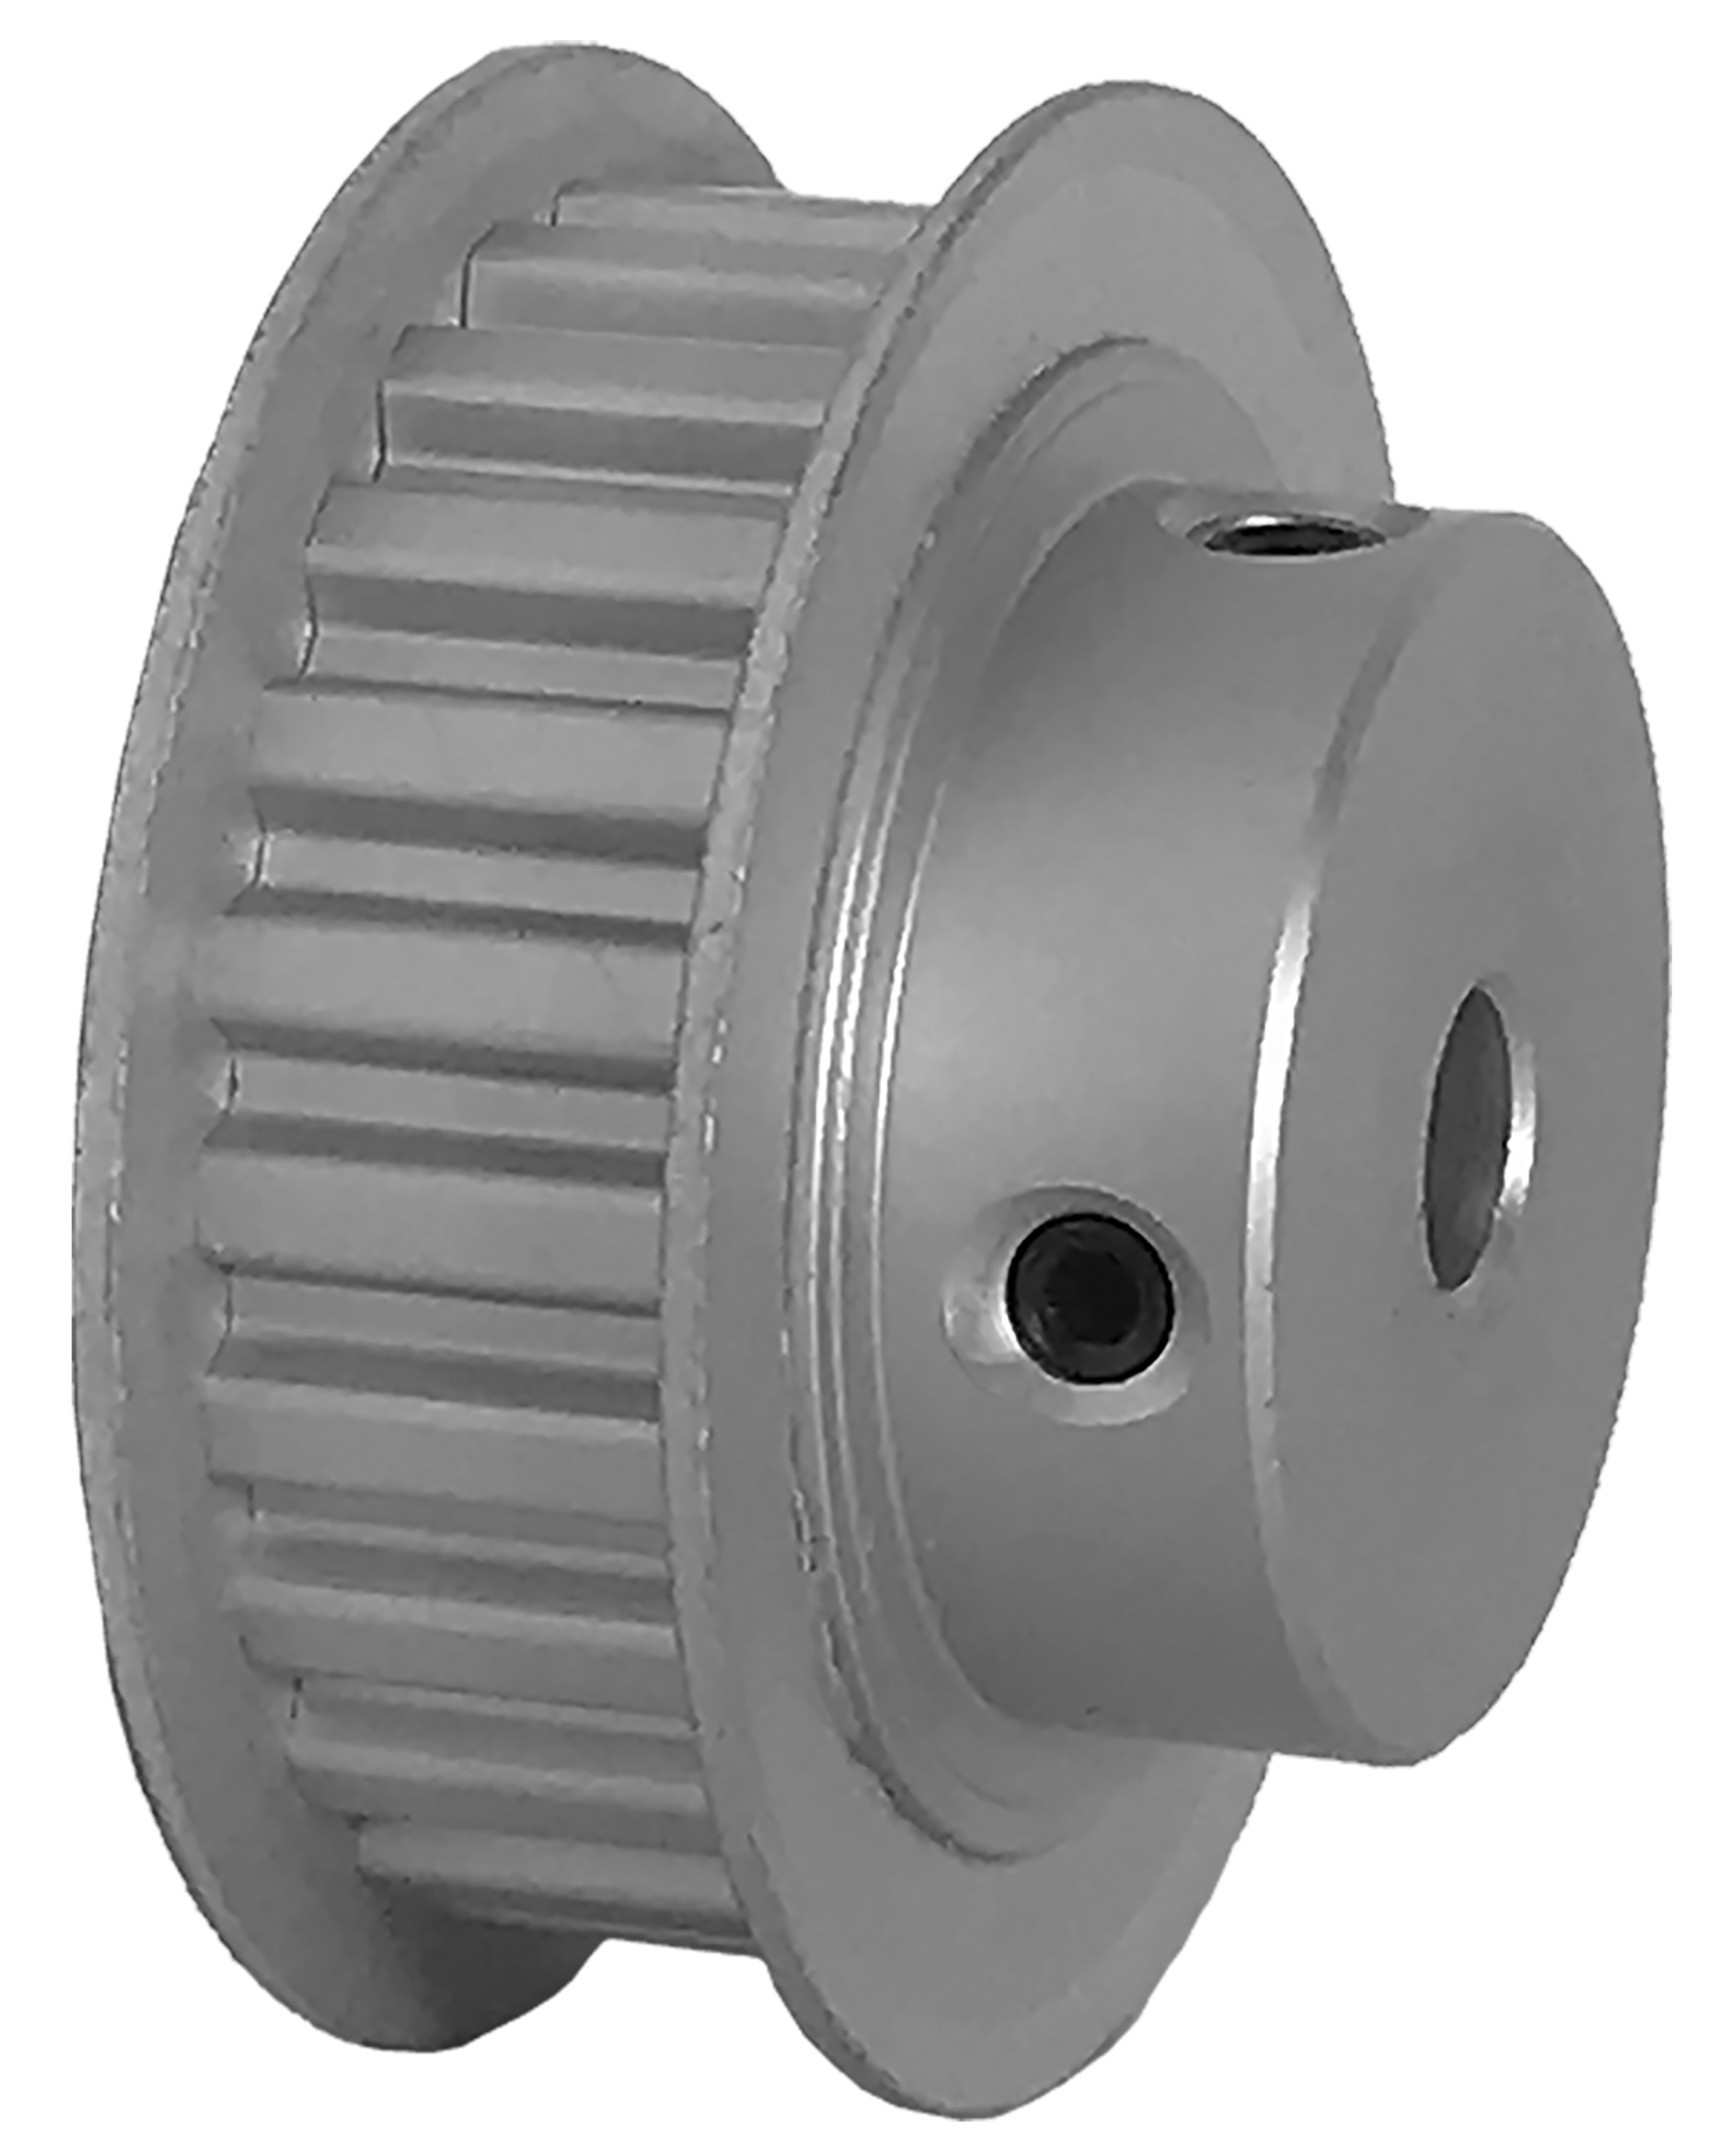 24XL037-6FA3 - Aluminum Imperial Pitch Pulleys